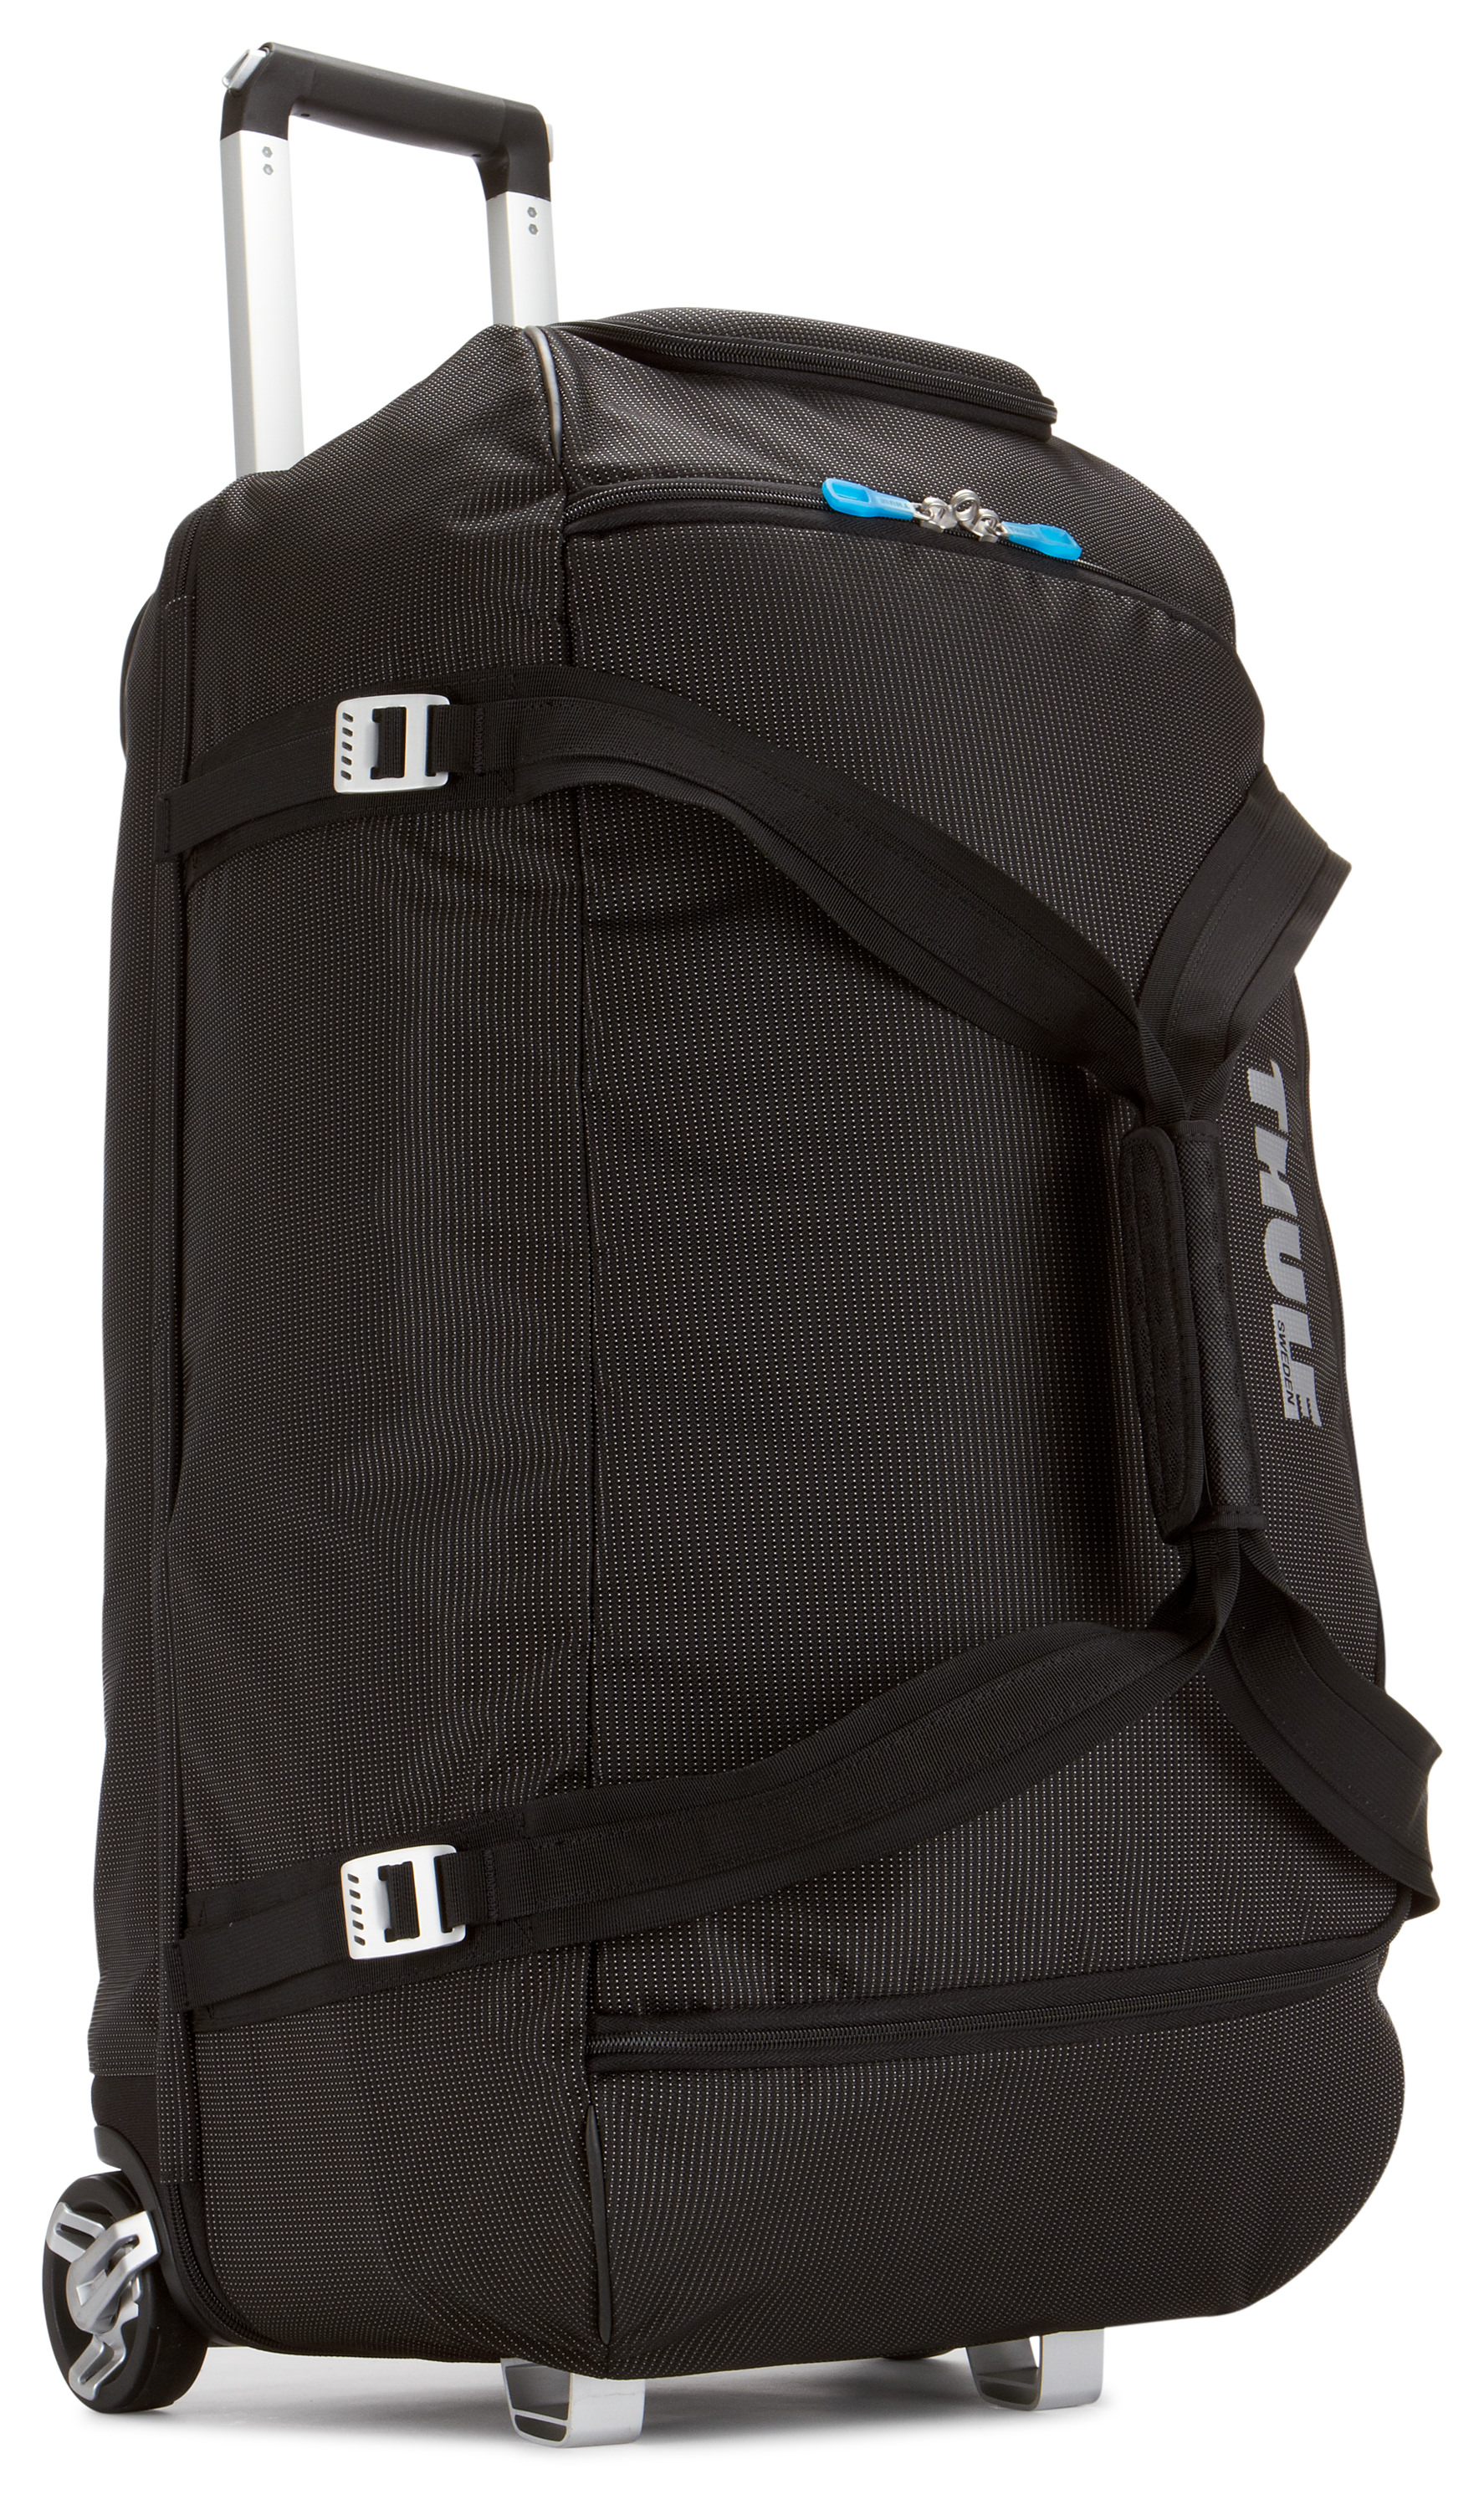 Thule Rolling Duffle Travel Bag Review | Cool Things Collection | 0